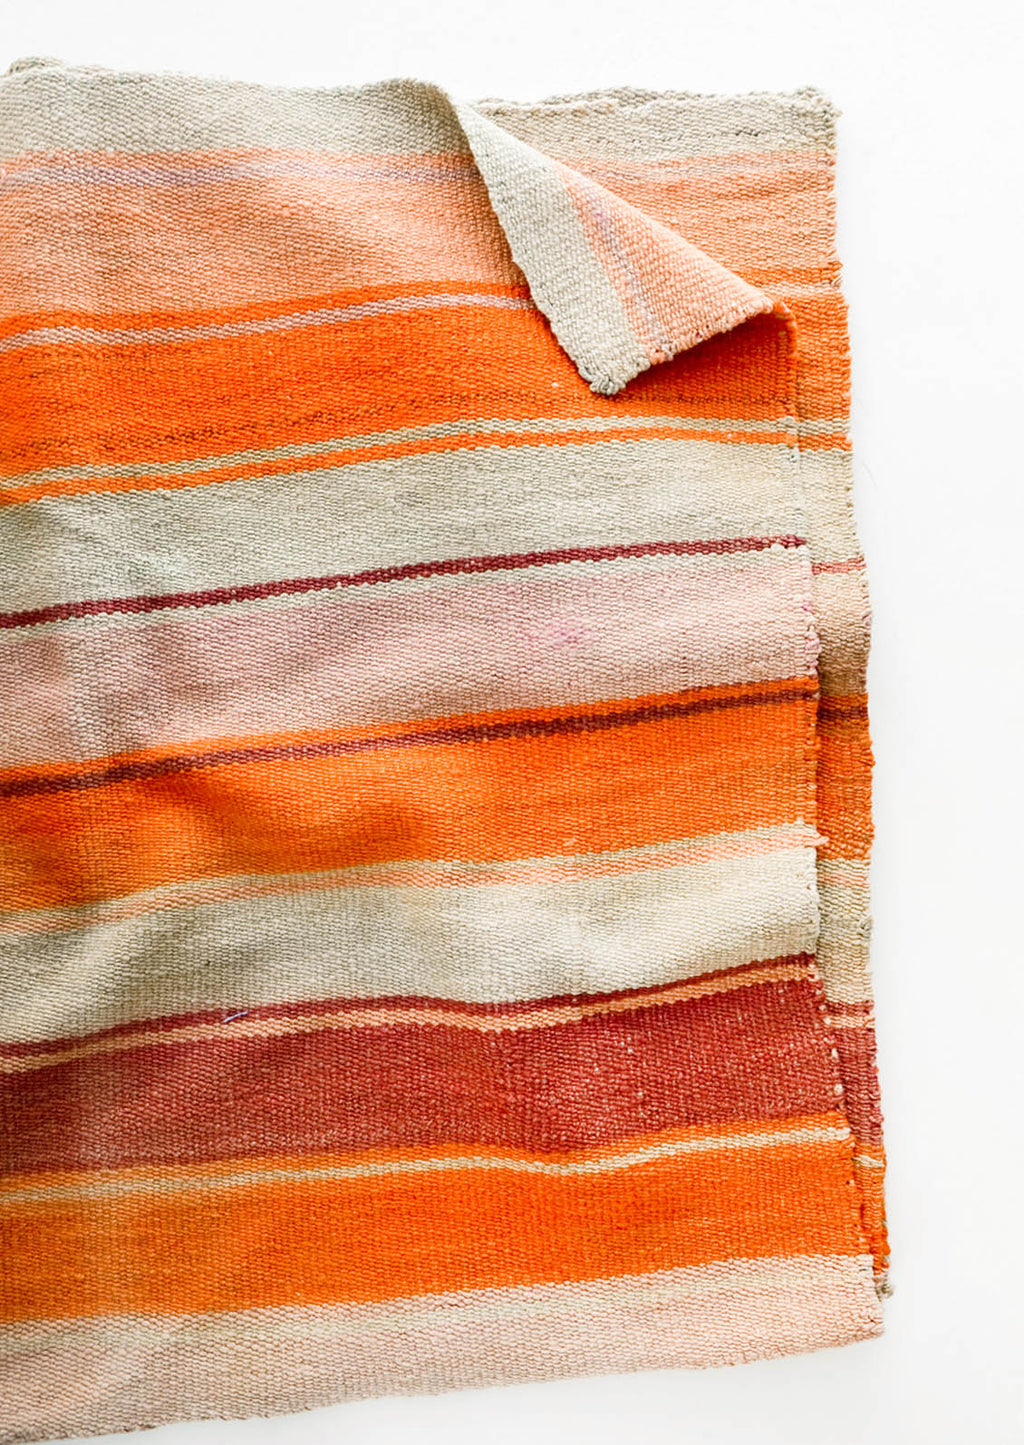 3: Woven textile intended for use as a rug or blanket, variegated colorful striped pattern.